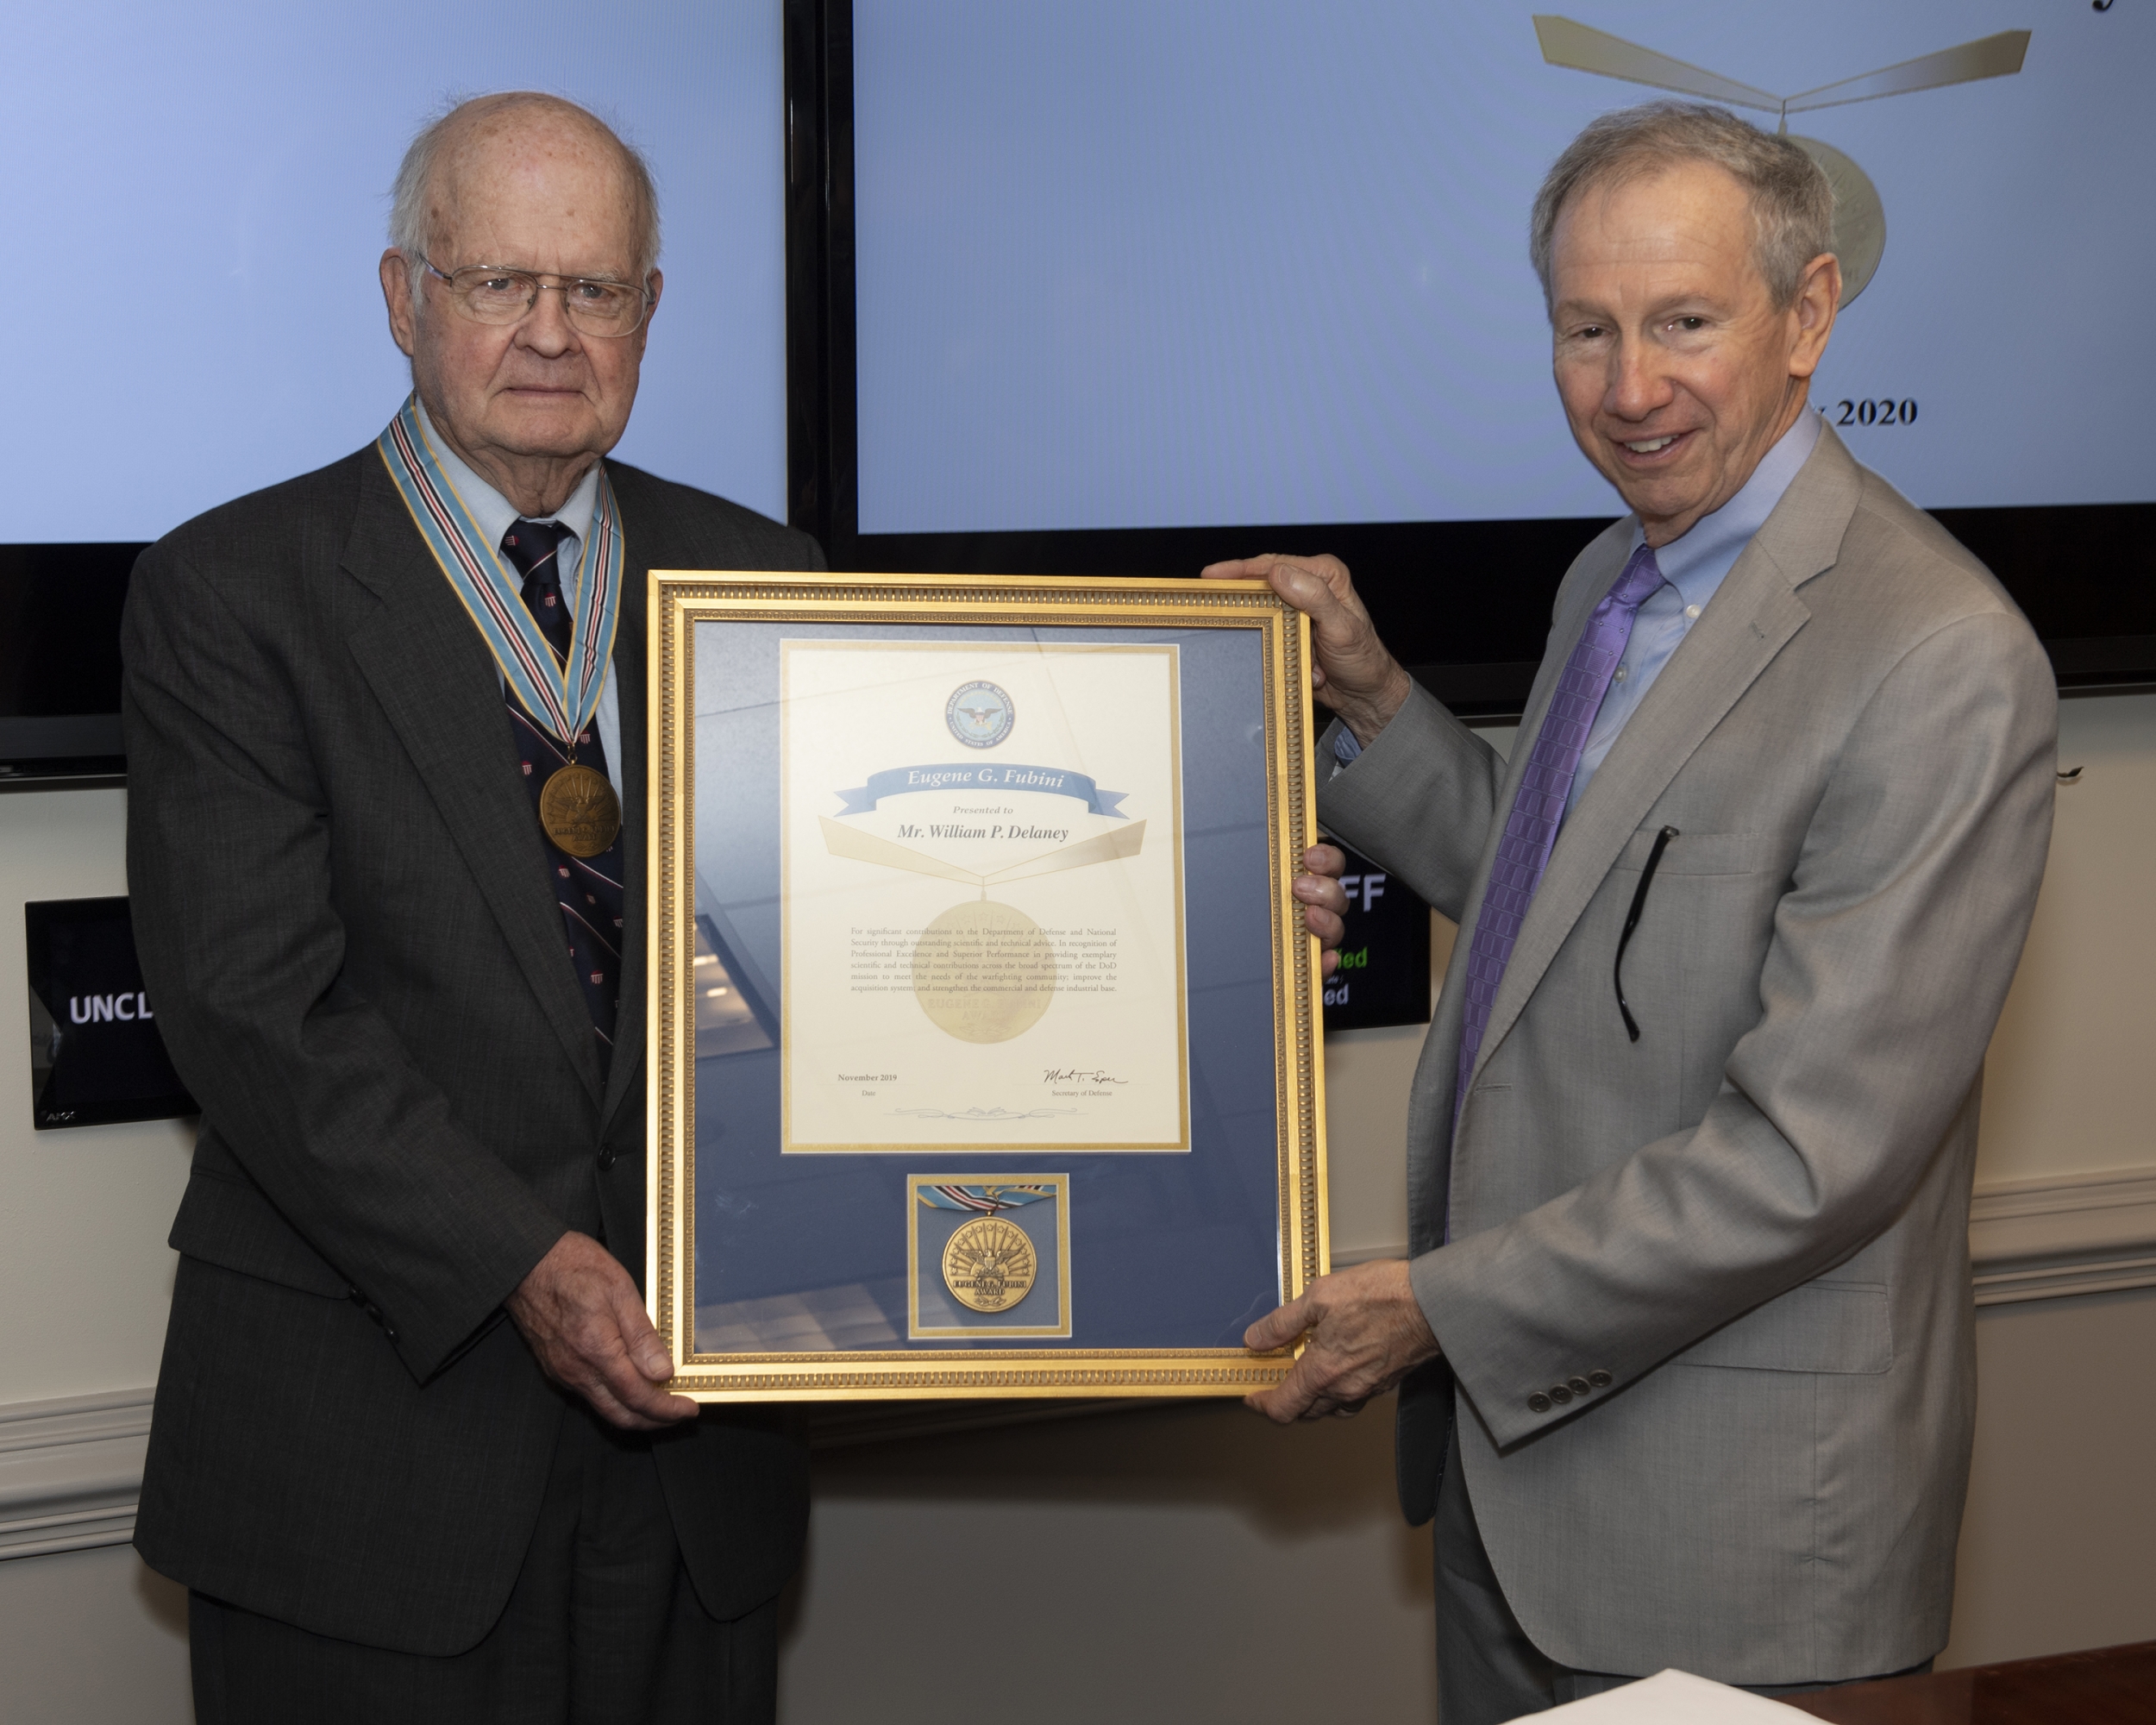 William Delaney was presented with the 2019 Eugene G. Fubini Award for years of providing scientific and technical guidance to the Department of Defense. Photo: Office of the Secretary of Defense Public Affairs